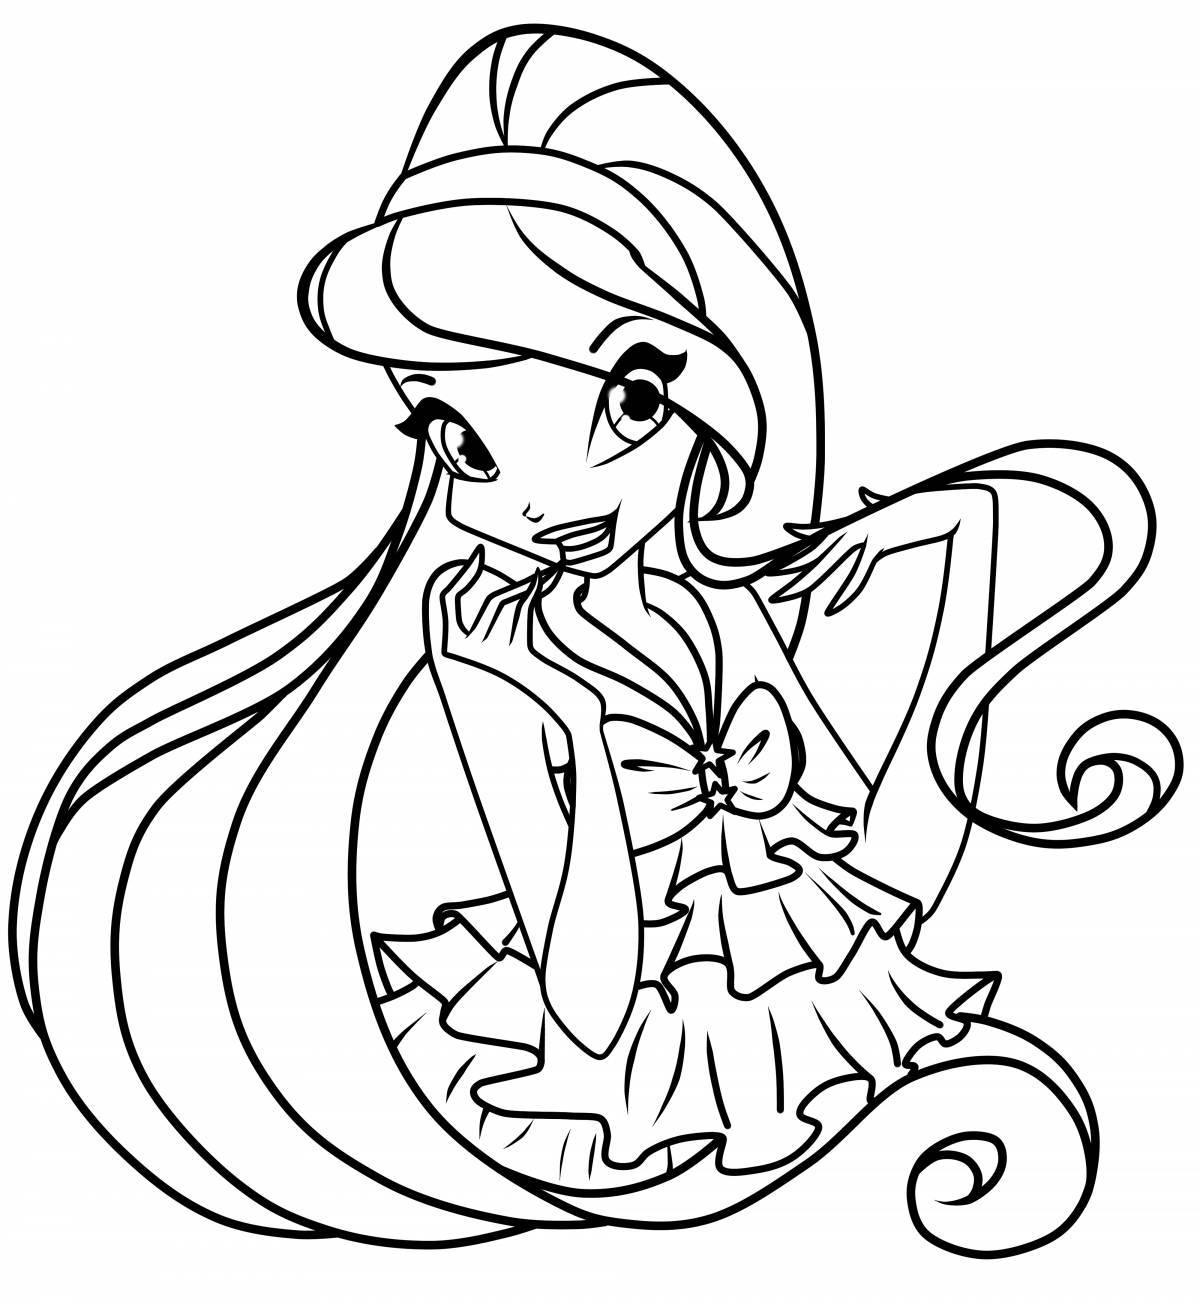 Colorful winx club coloring page